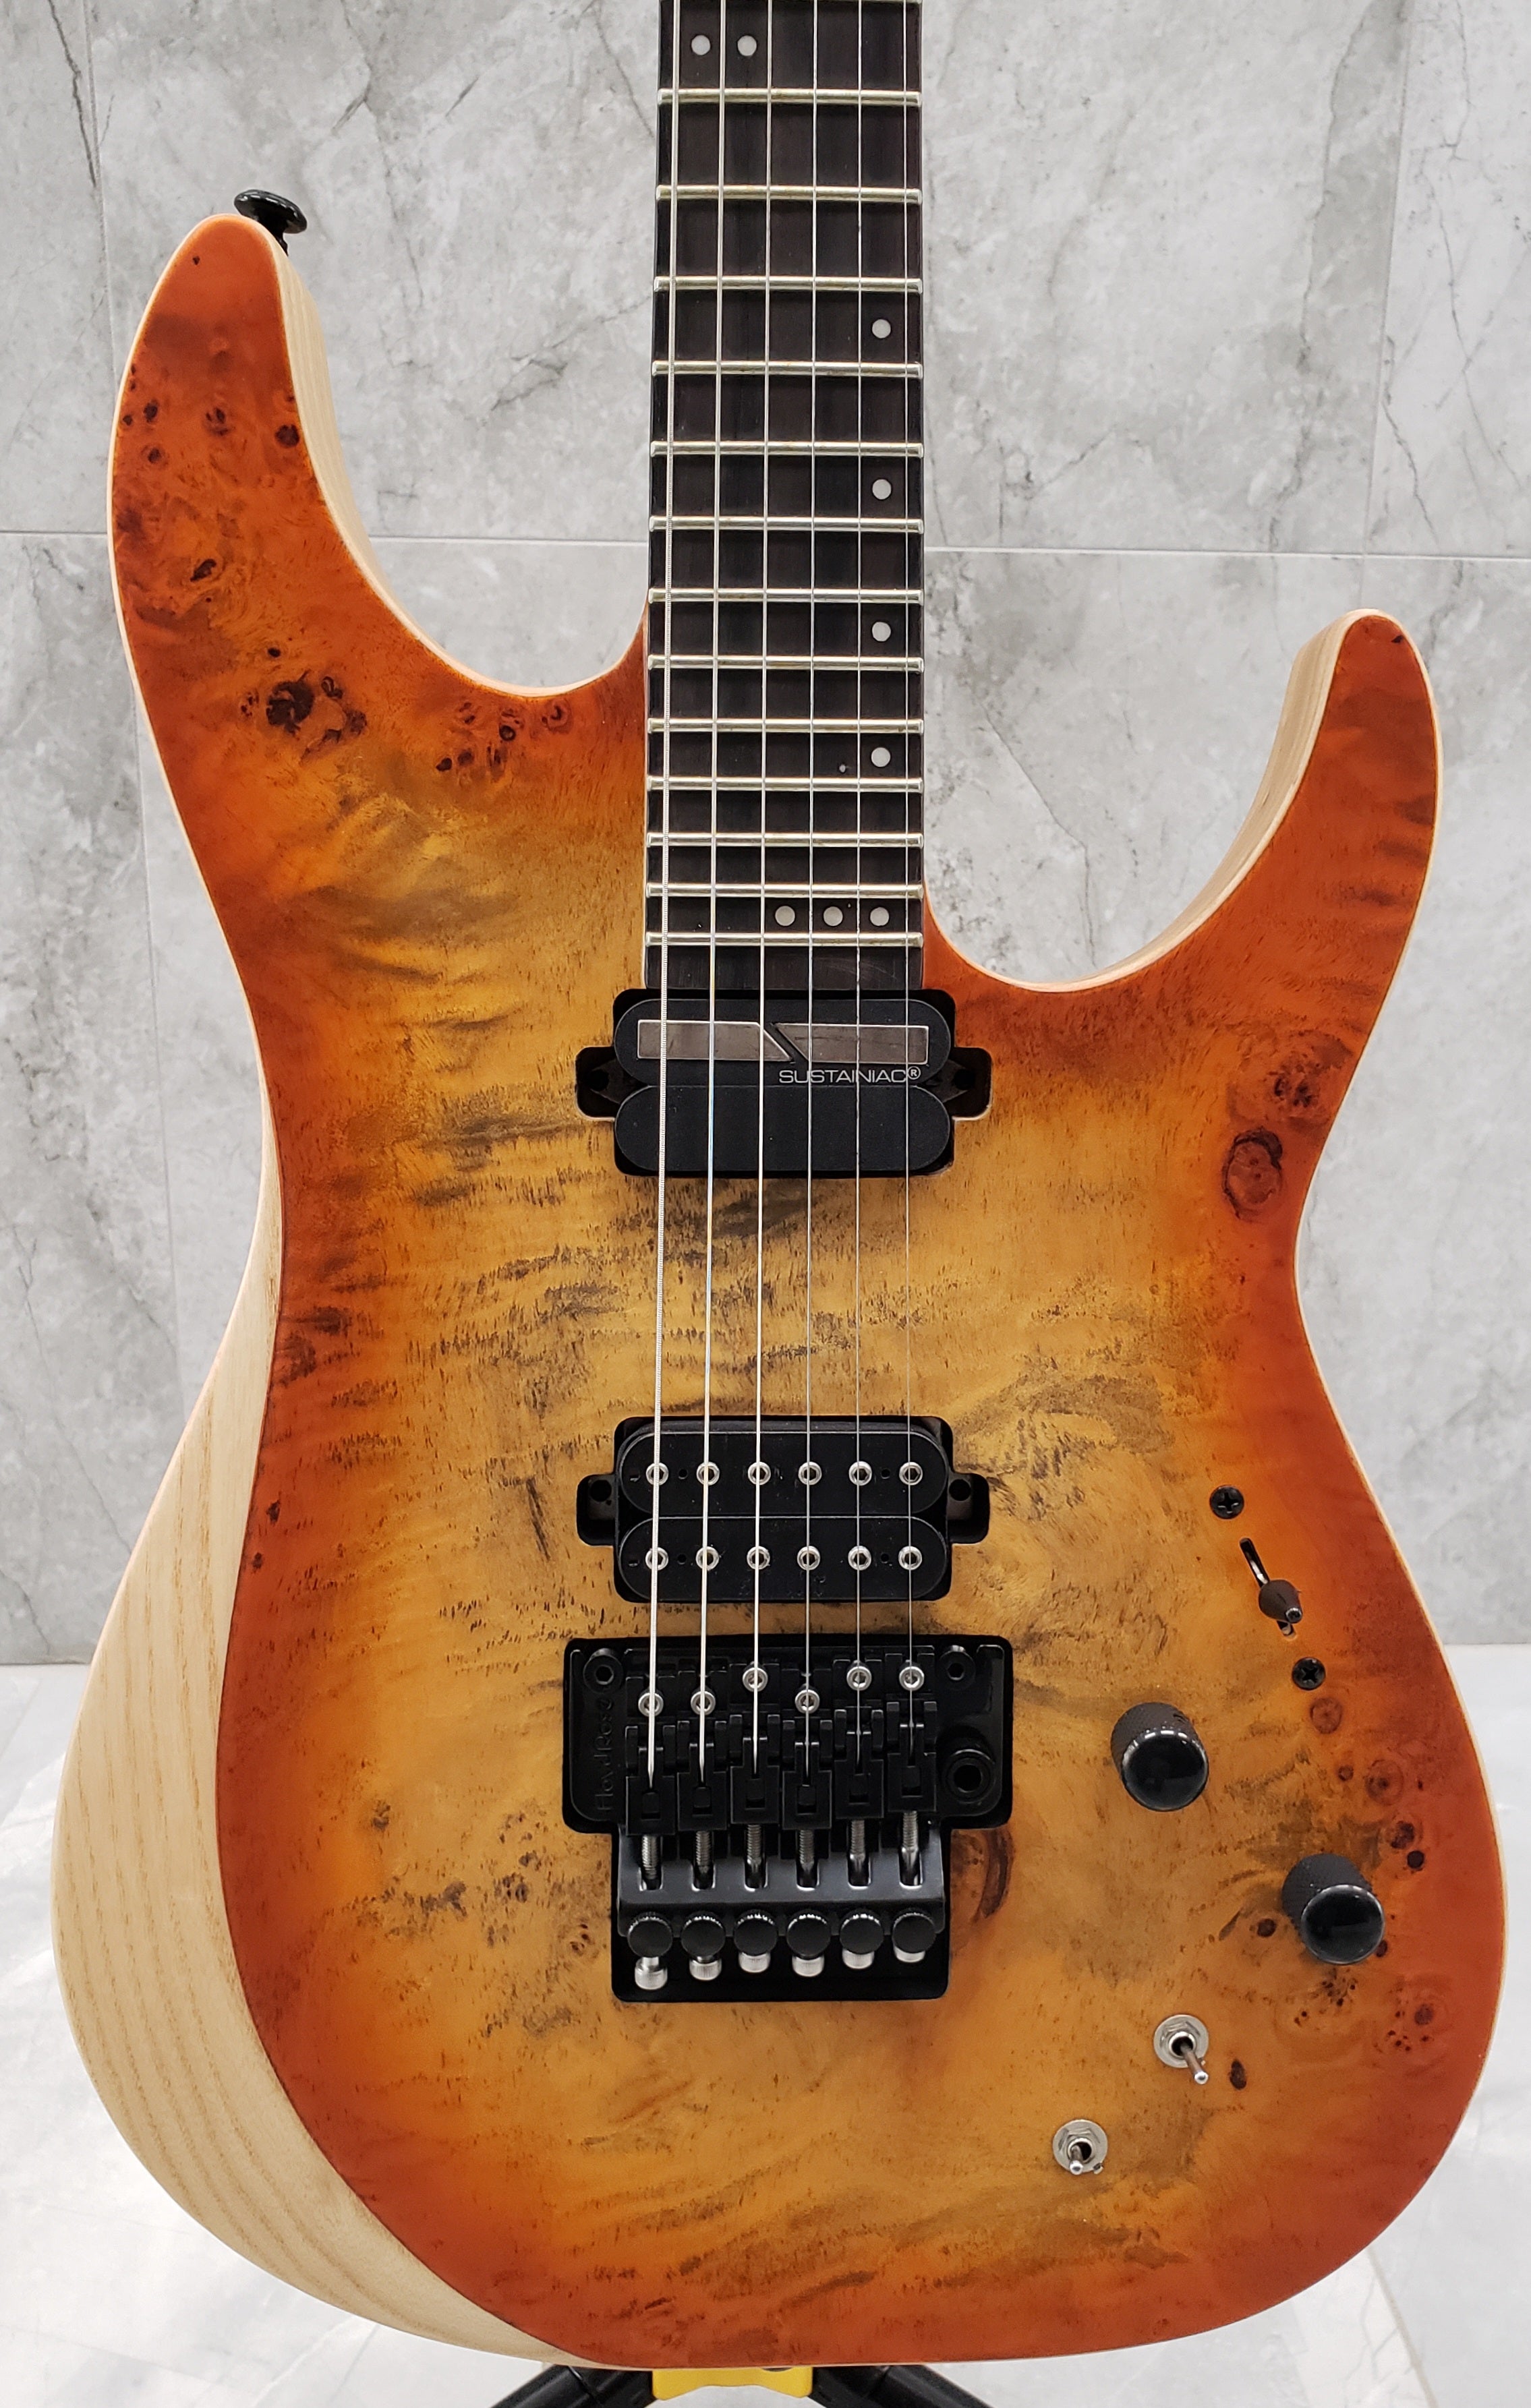 Schecter Reaper-6 FR S Satin Inferno Burst 1508-SHC with Sustainiac SERIAL NUMBER IW20123121 - 7.8 LBS